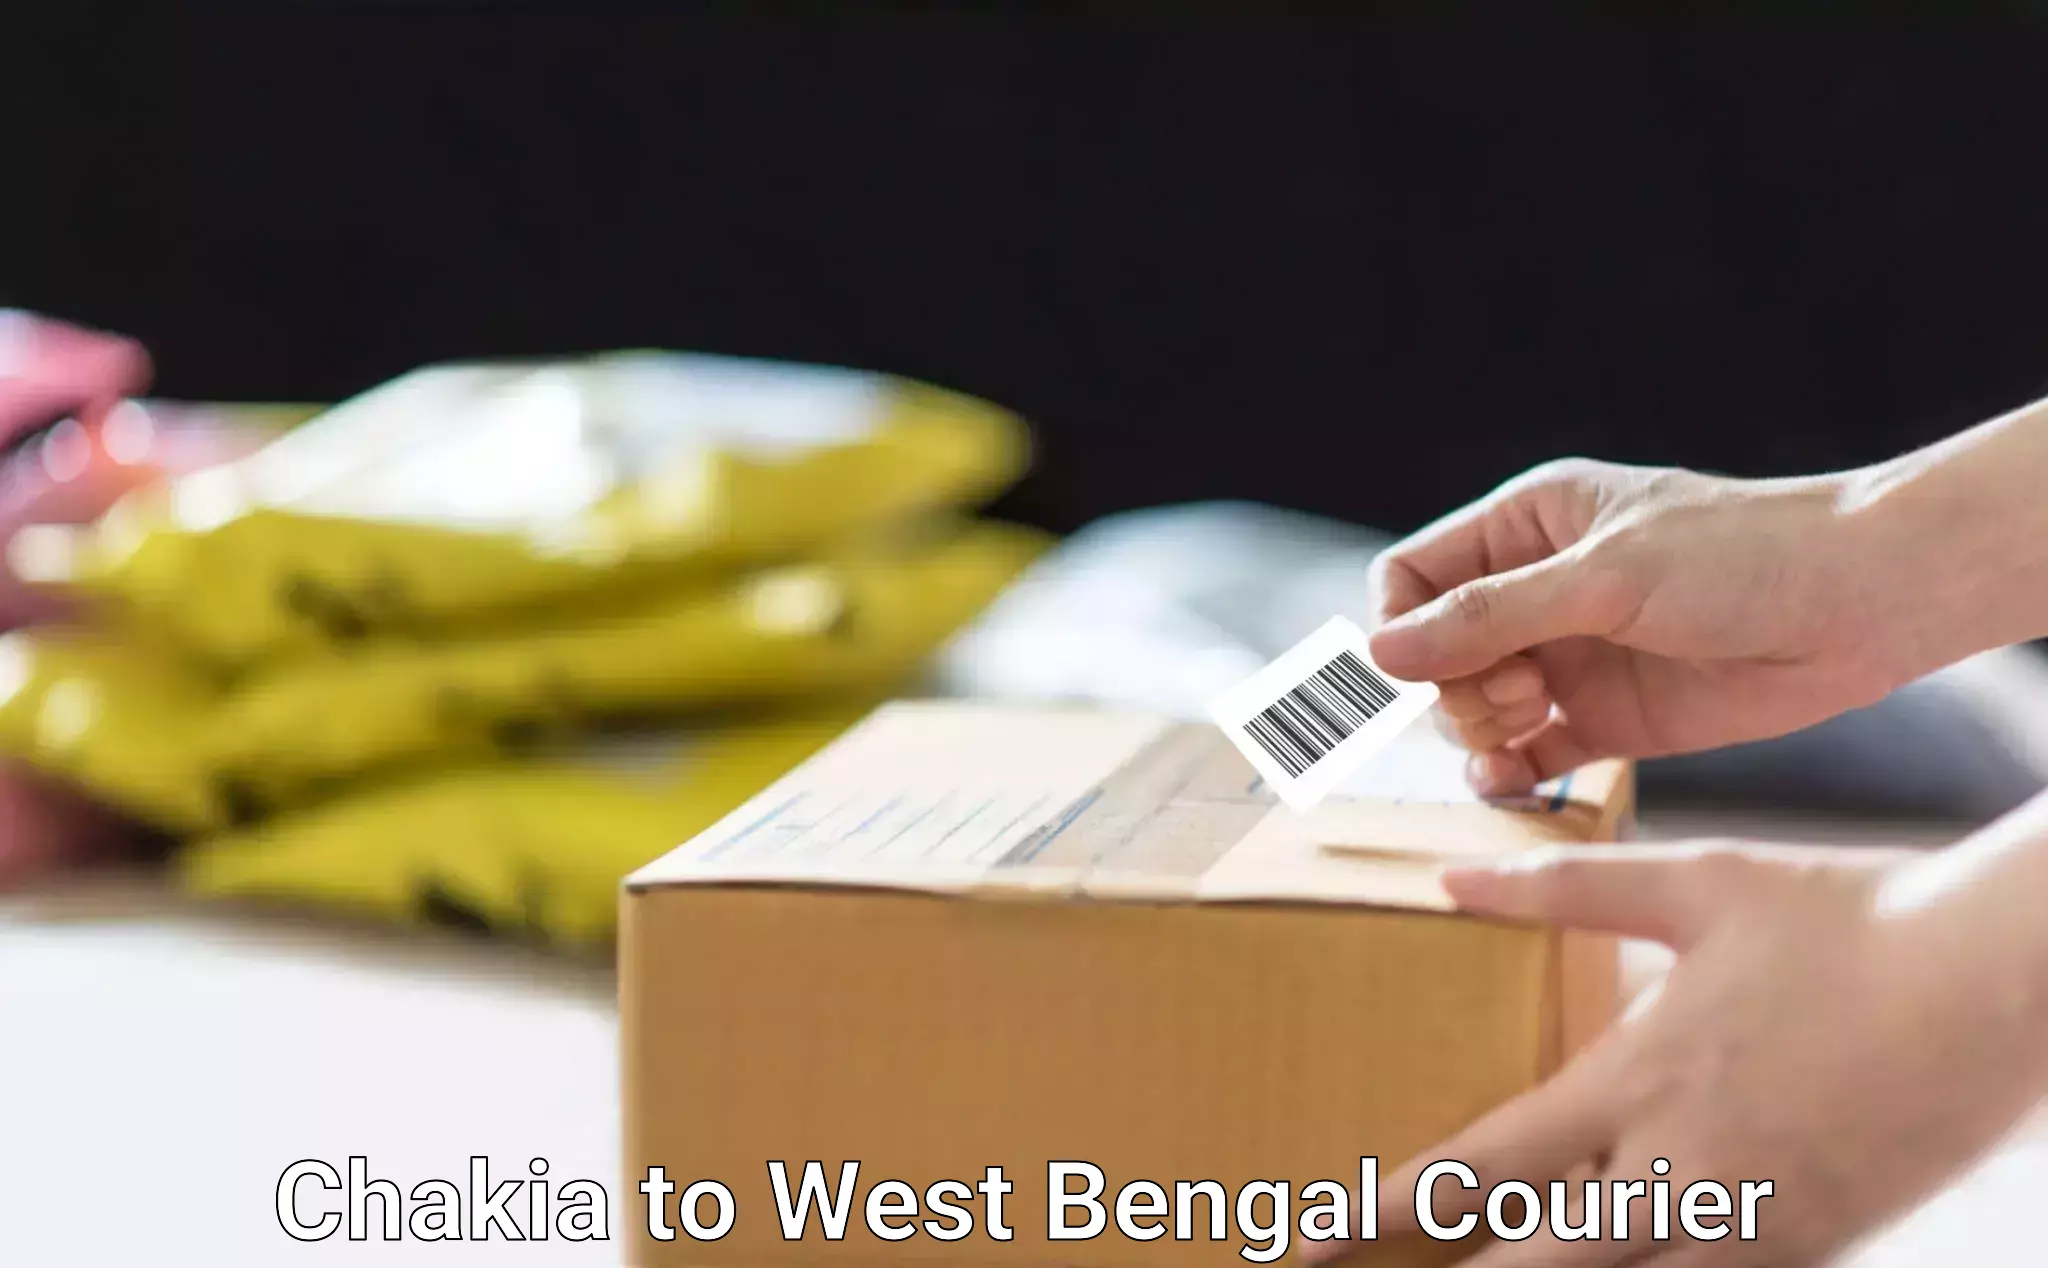 Professional packing and transport Chakia to West Bengal